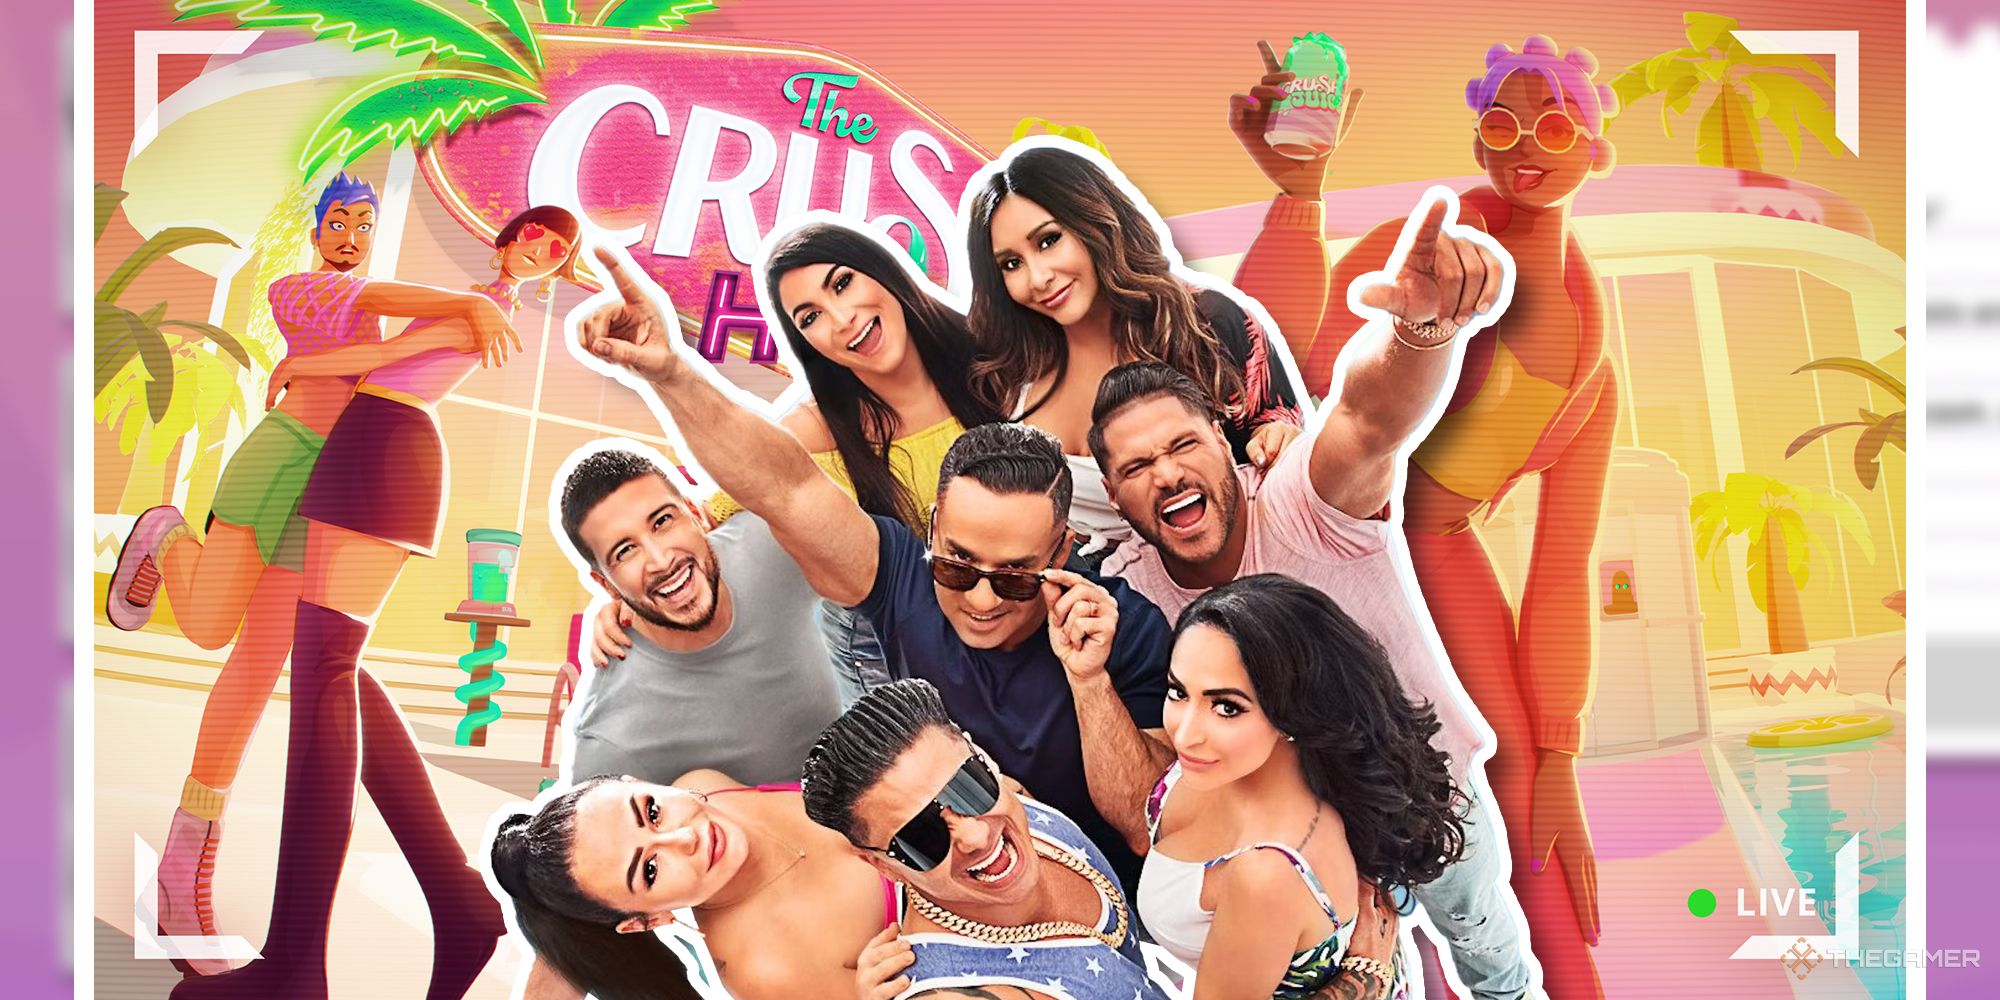 Art from The Crush House with the cast of Jersey Shore superimposed in the middle